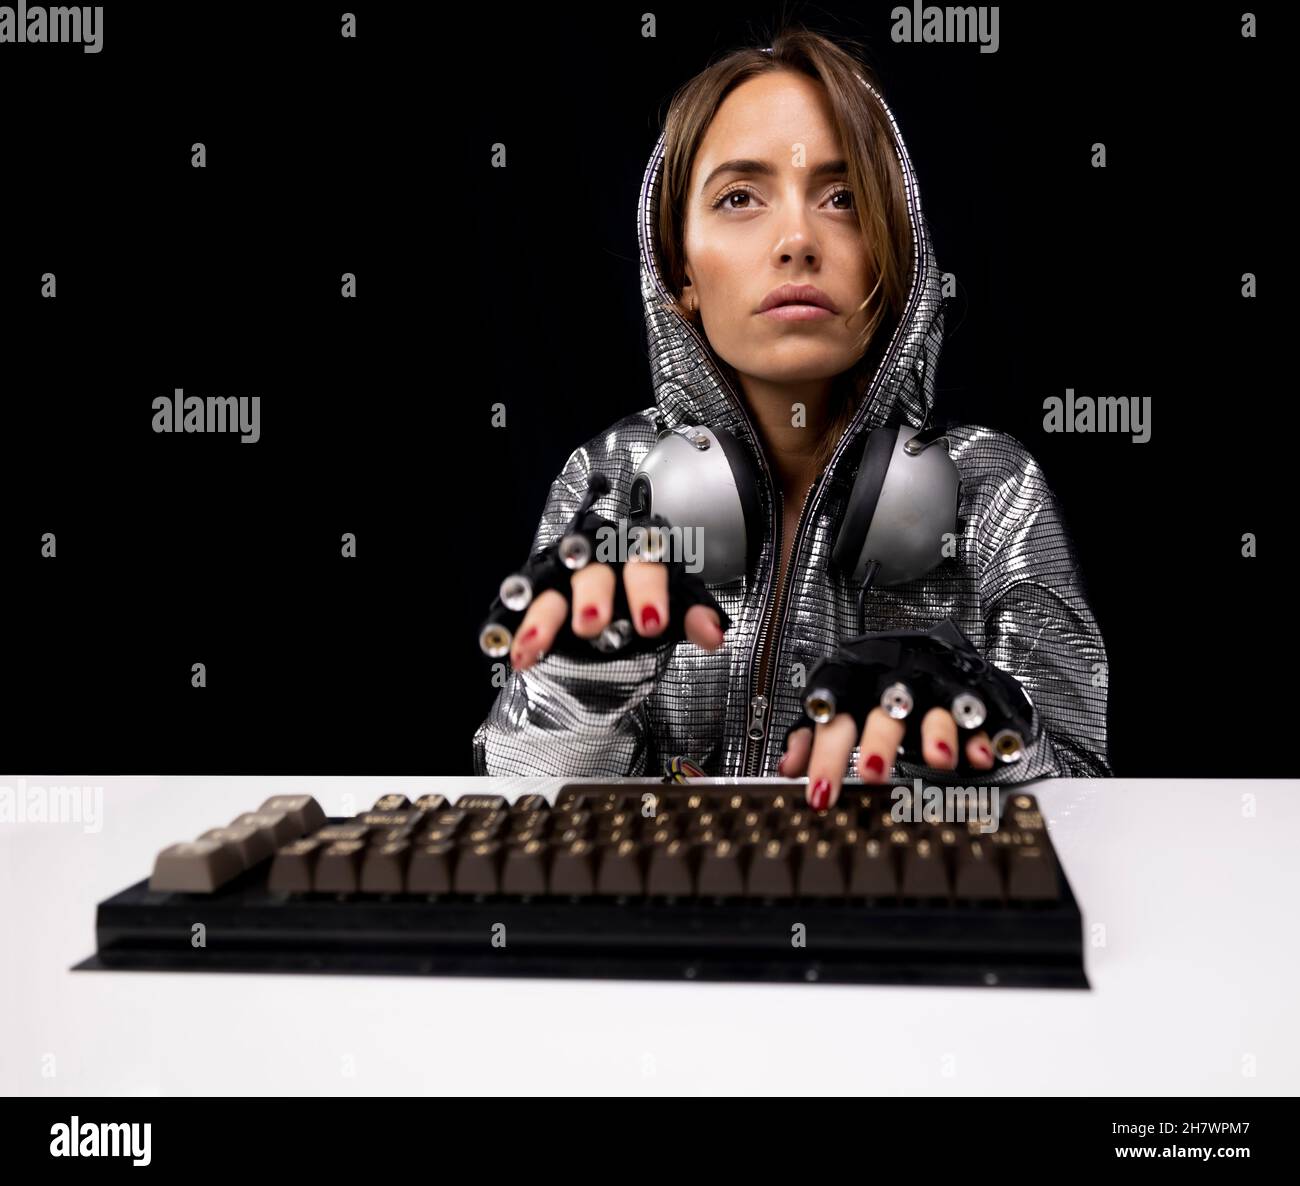 Woman with silver costume typing on keyboard Stock Photo - Alamy